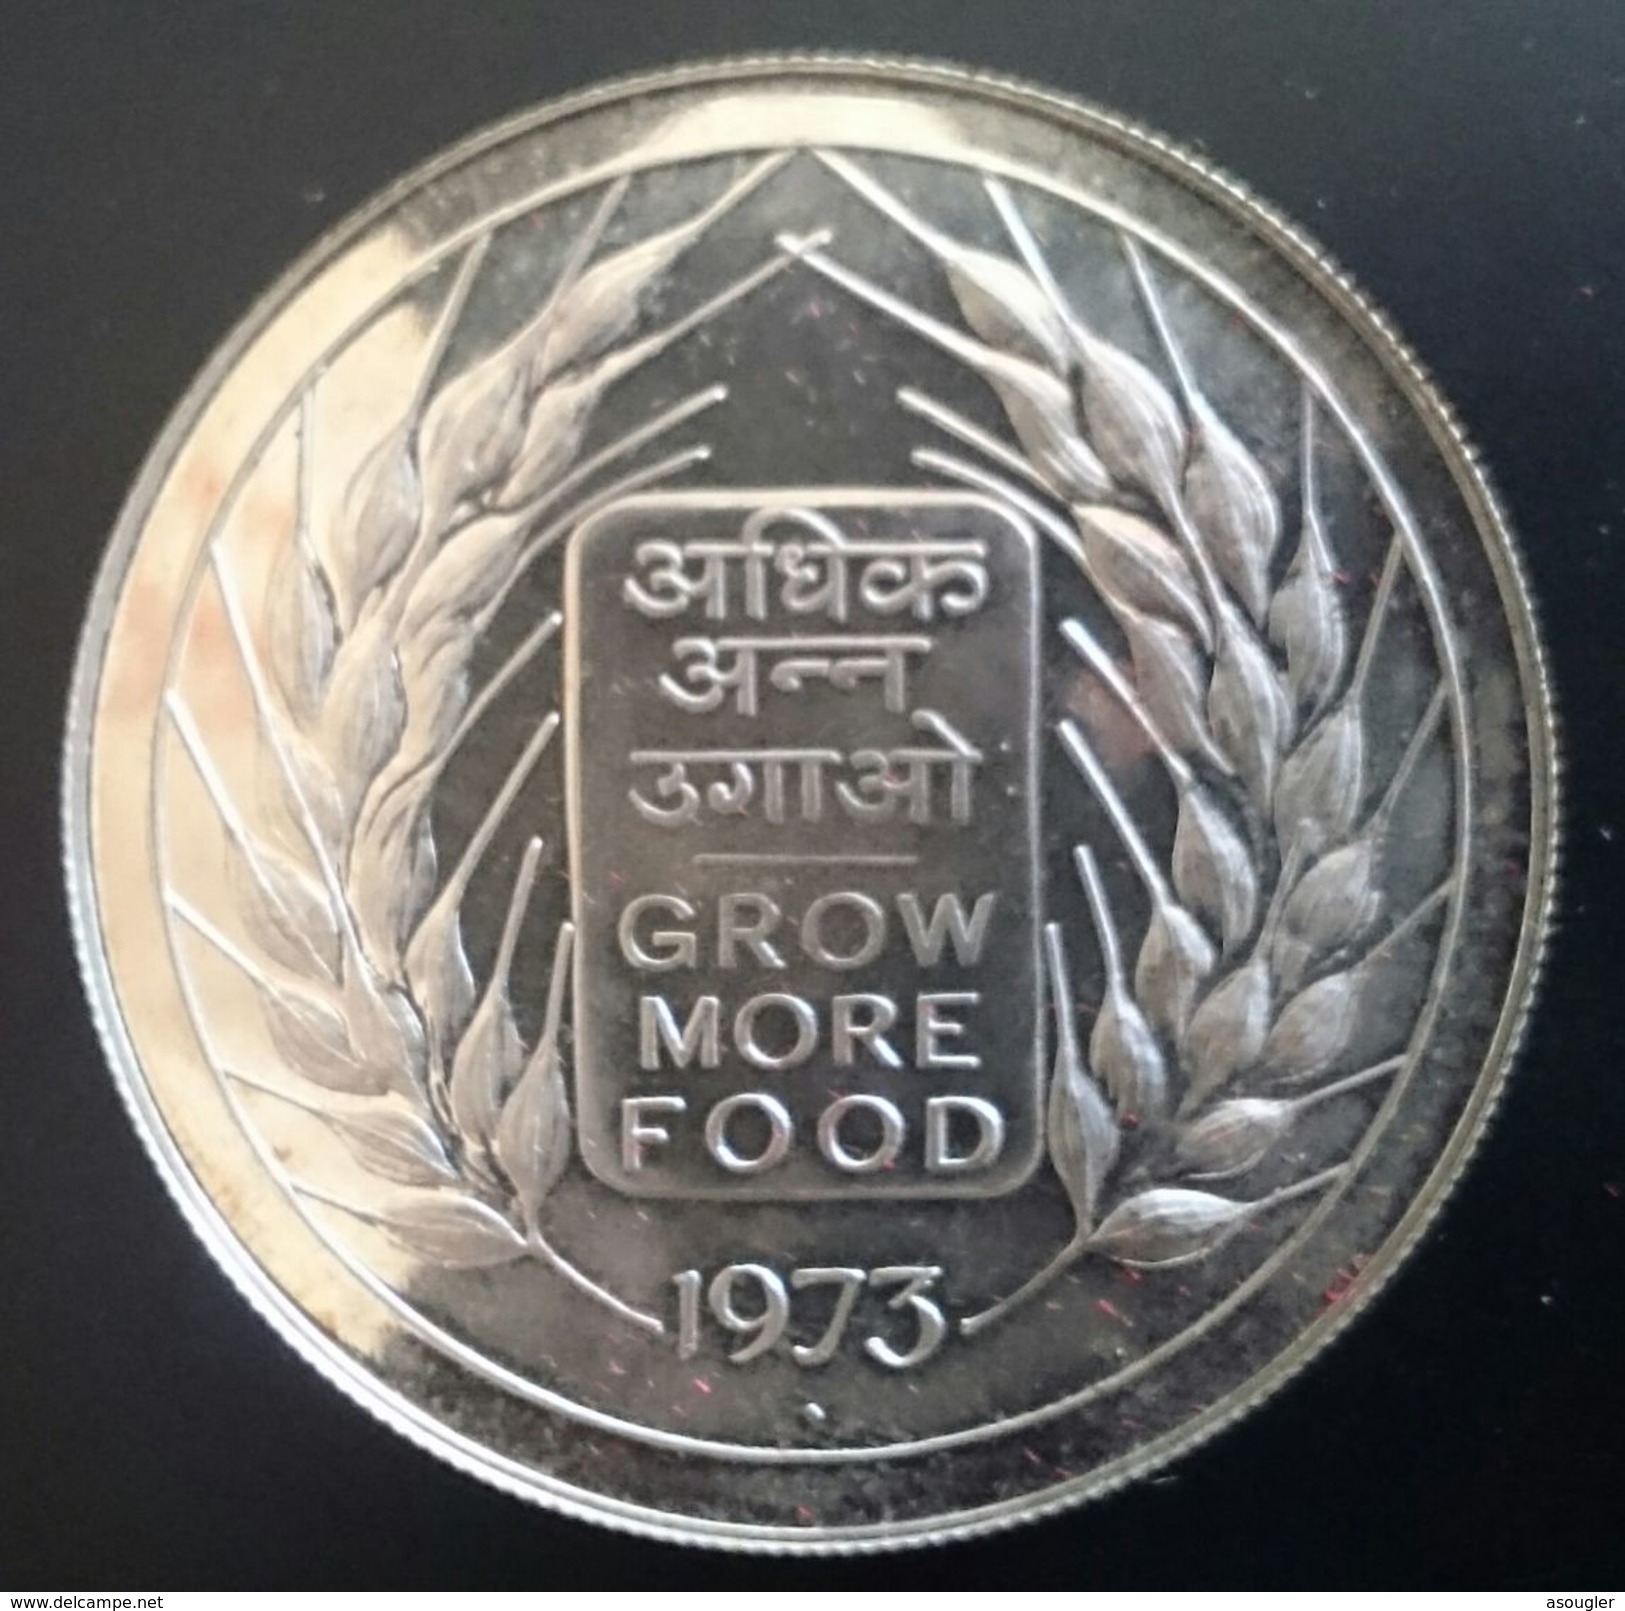 INDIA 20 RUPEES 1973 SILVER PROOF "F.A.O." Free Shipping Via Registered Air Mail - India